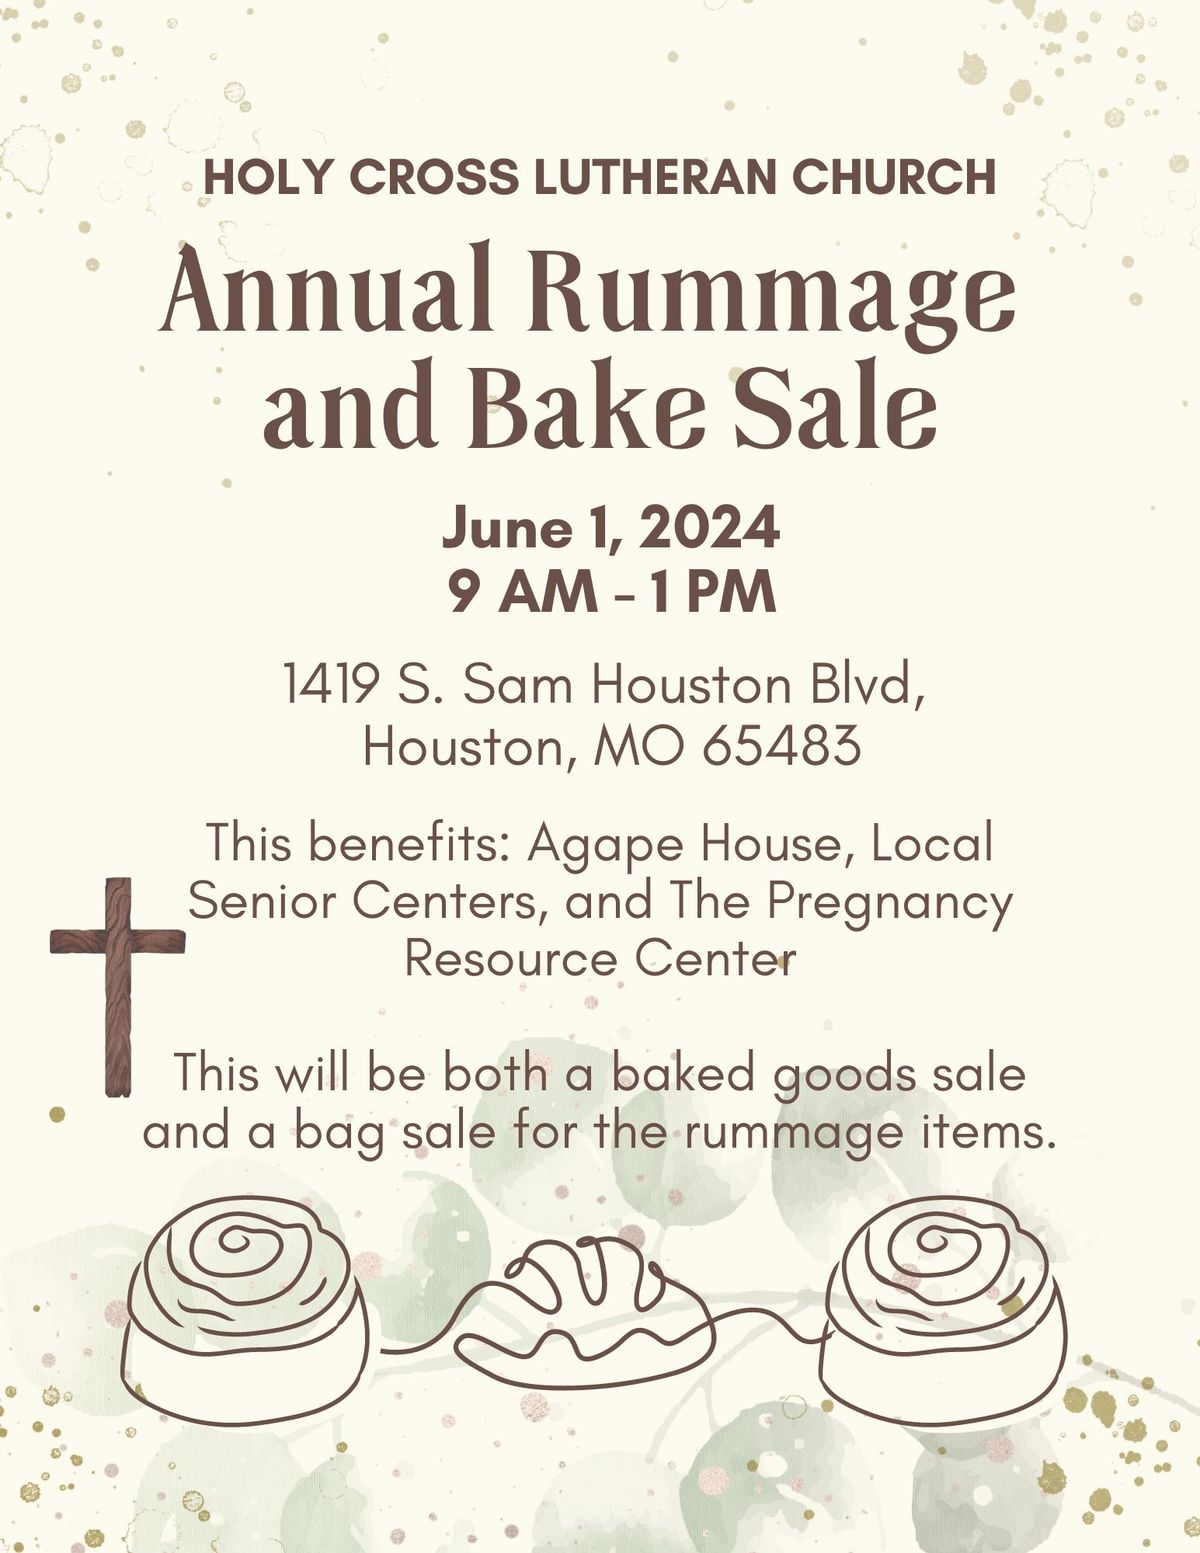 Holy Cross Lutheran Church Annual Rummage and Bake Sale